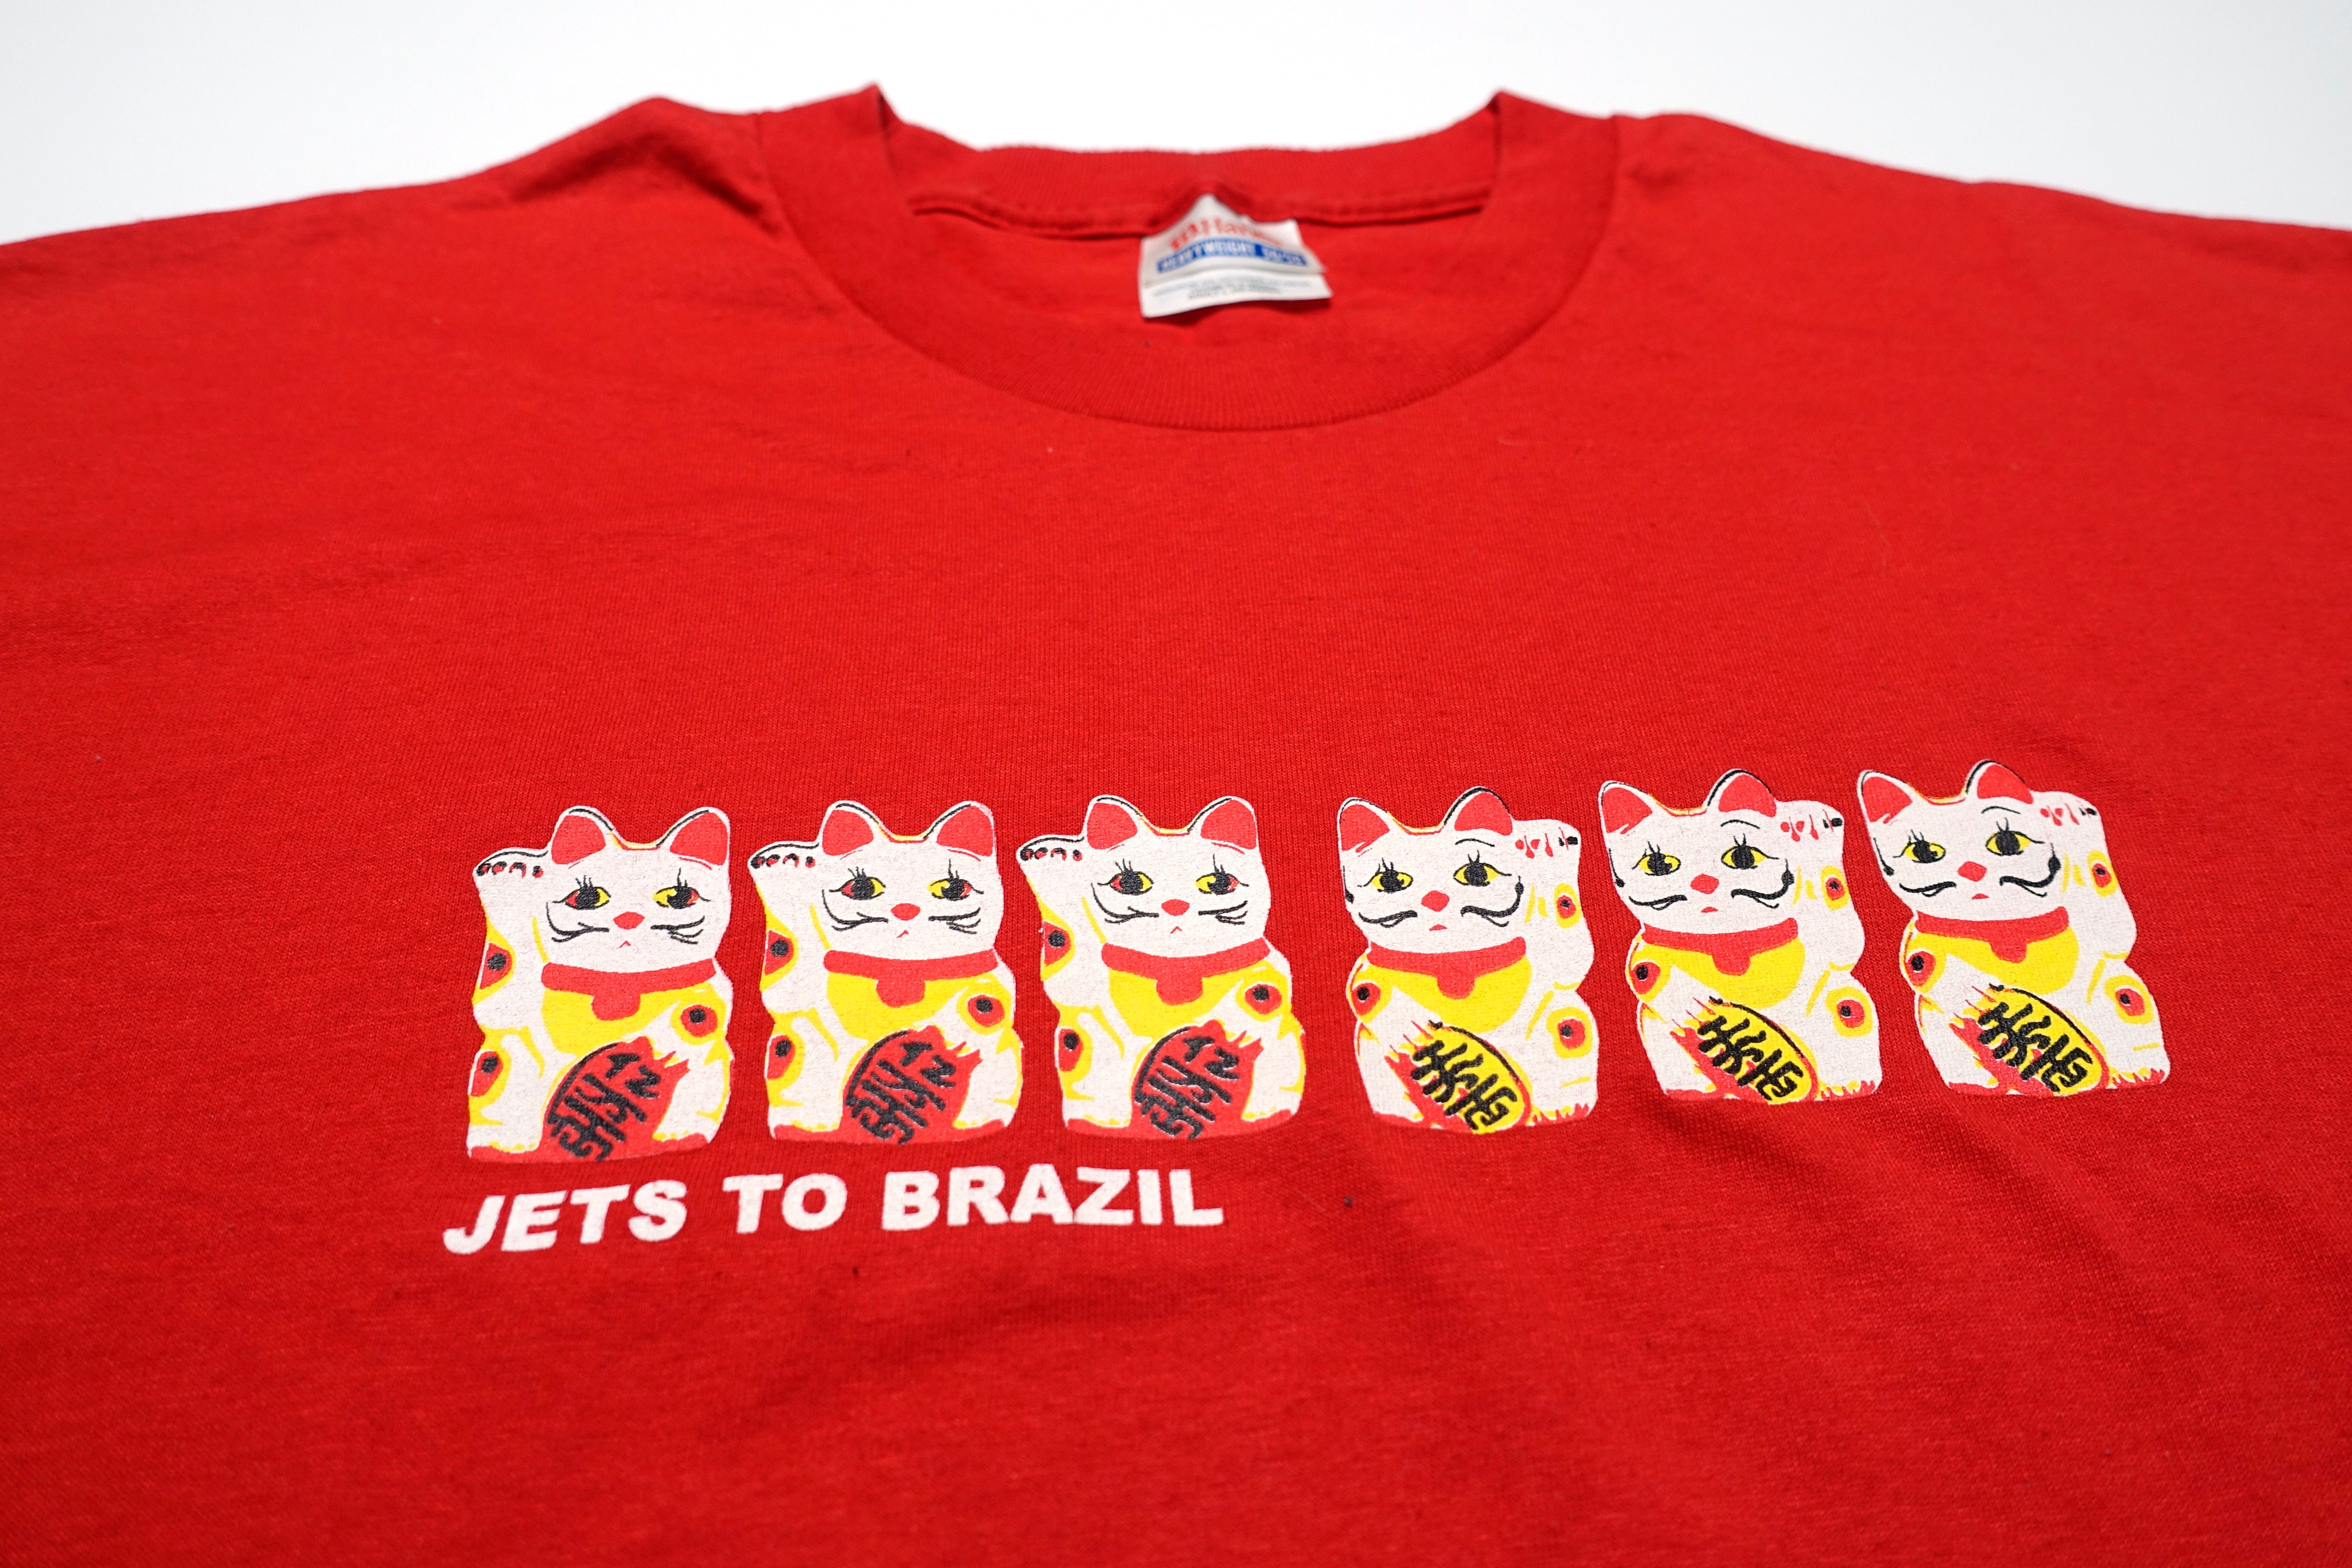 Jets To Brazil - Good Luck Cats Tour Shirt Size Large